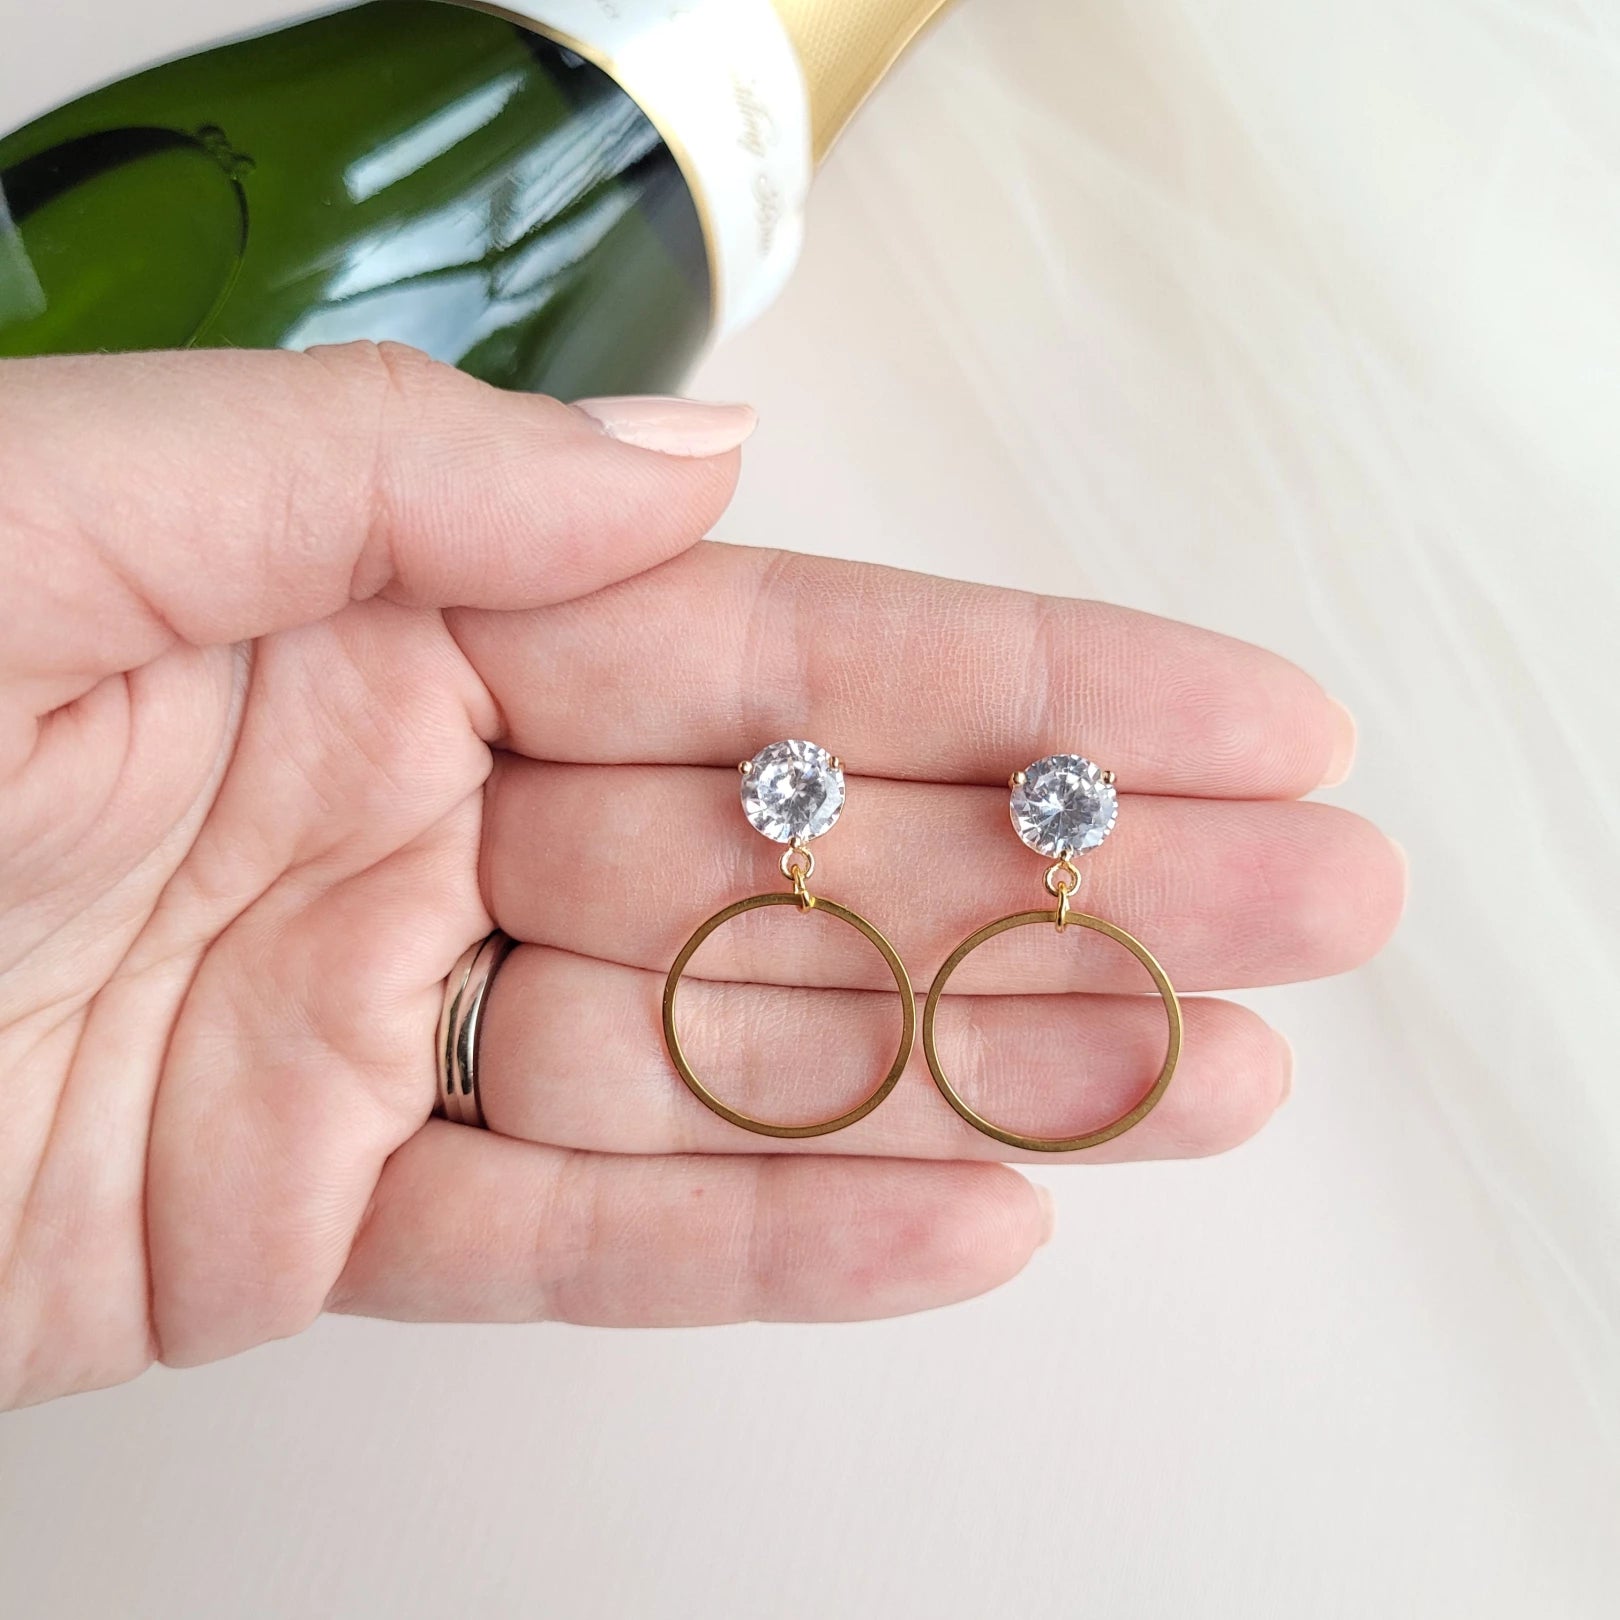 Our I Do Earrings are the cutest little earrings that look exactly like an engagement ring! These are perfect for engagement parties and beyond. Plus, bride or not, these earrings are perfect for wedding guests or just to add a formal touch to any look.  Zircon stud posts on gold-plated brass 18k gold-plated stainless steel dainty loops